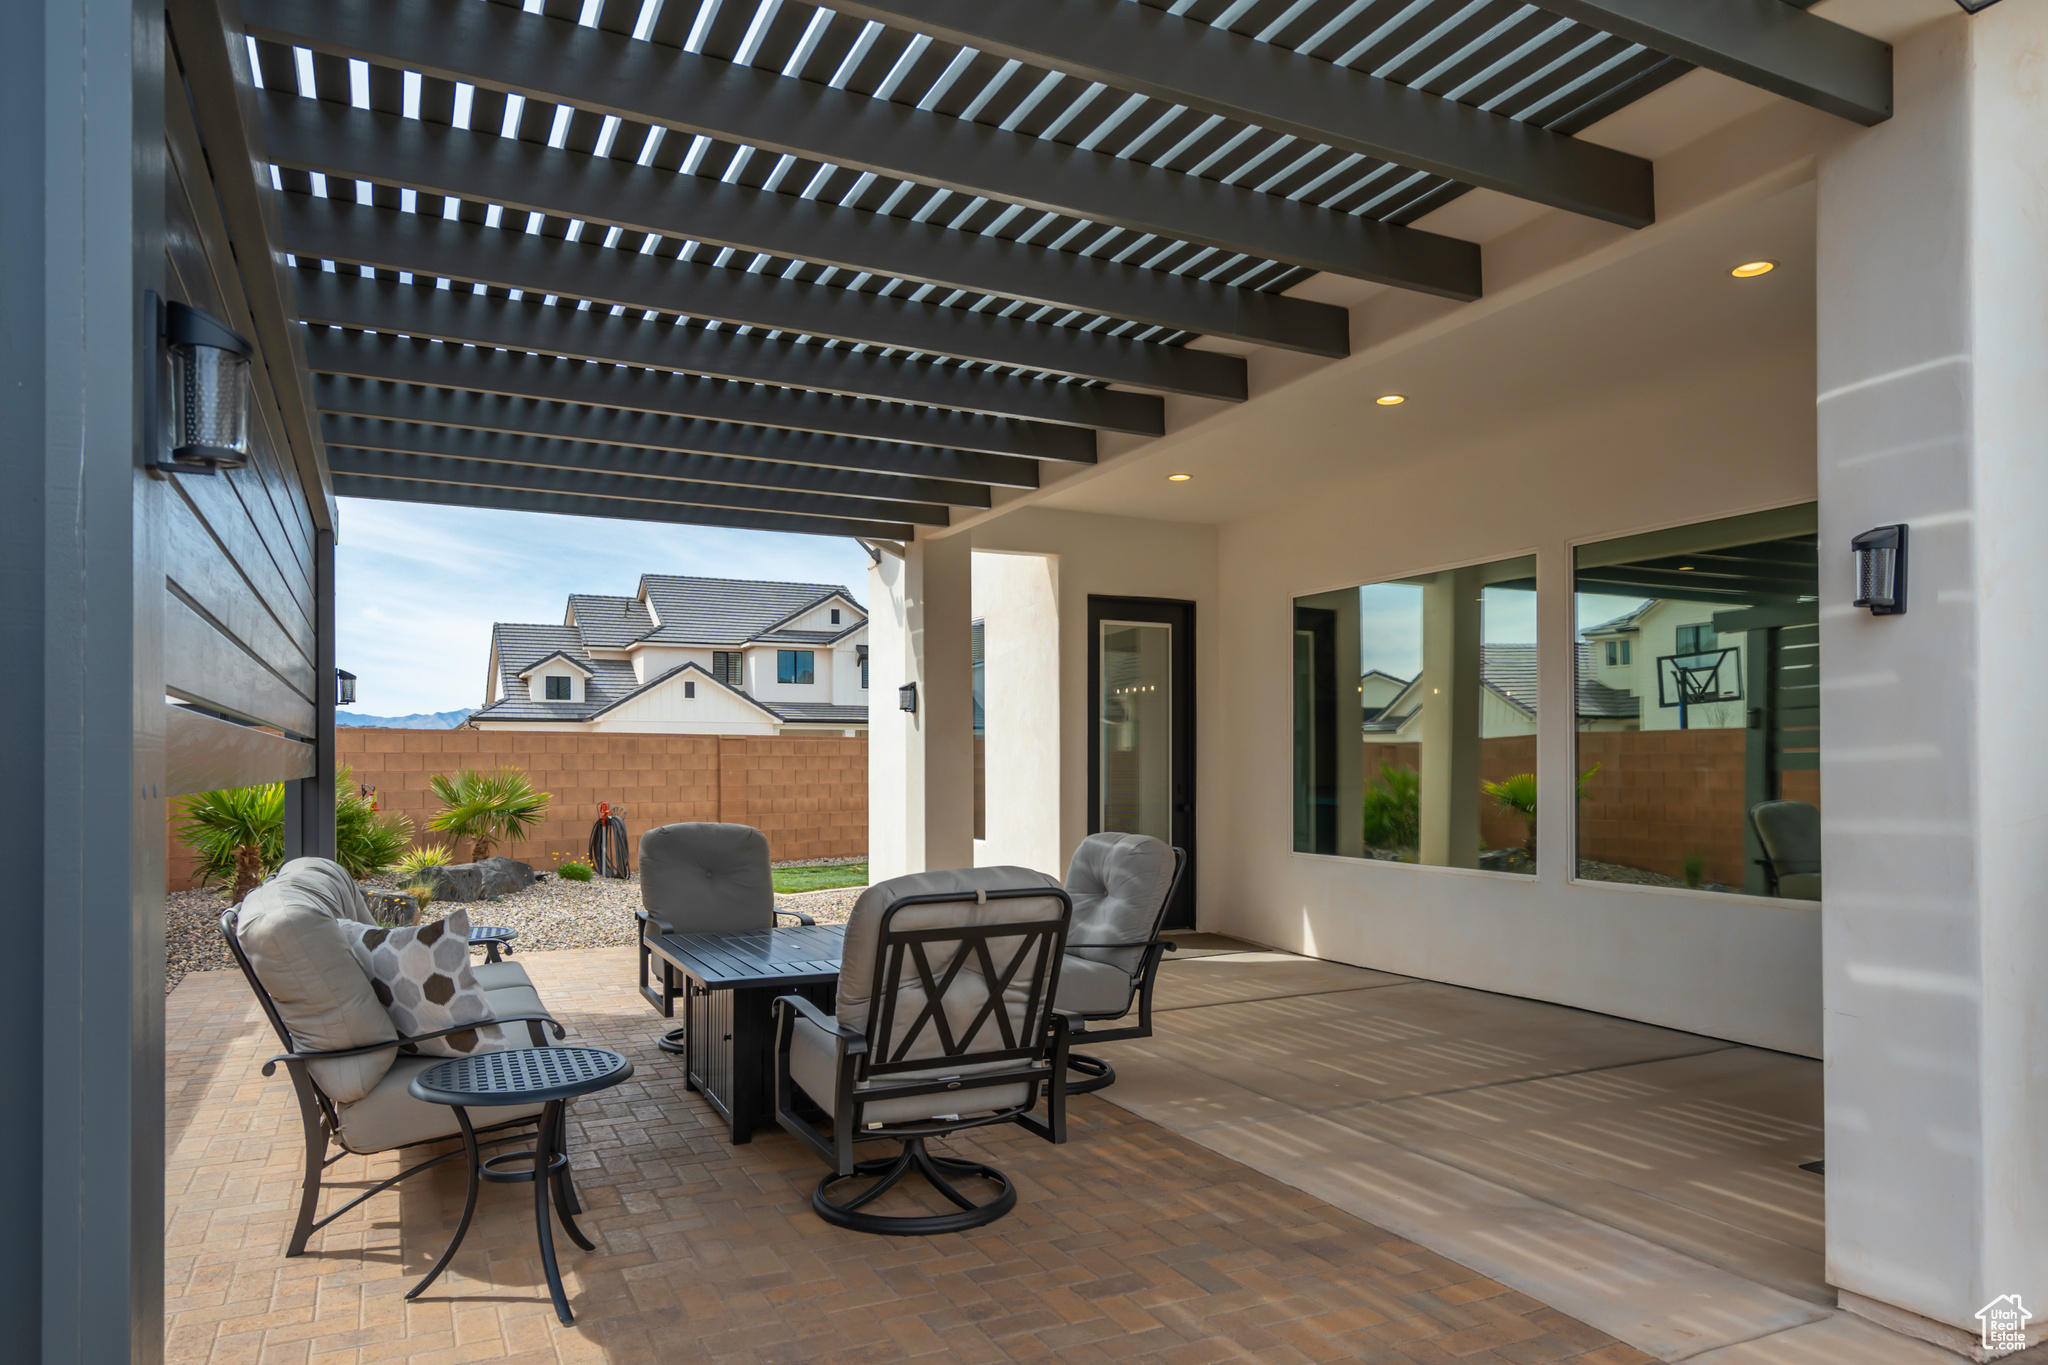 View of terrace with a pergola and an outdoor hangout area